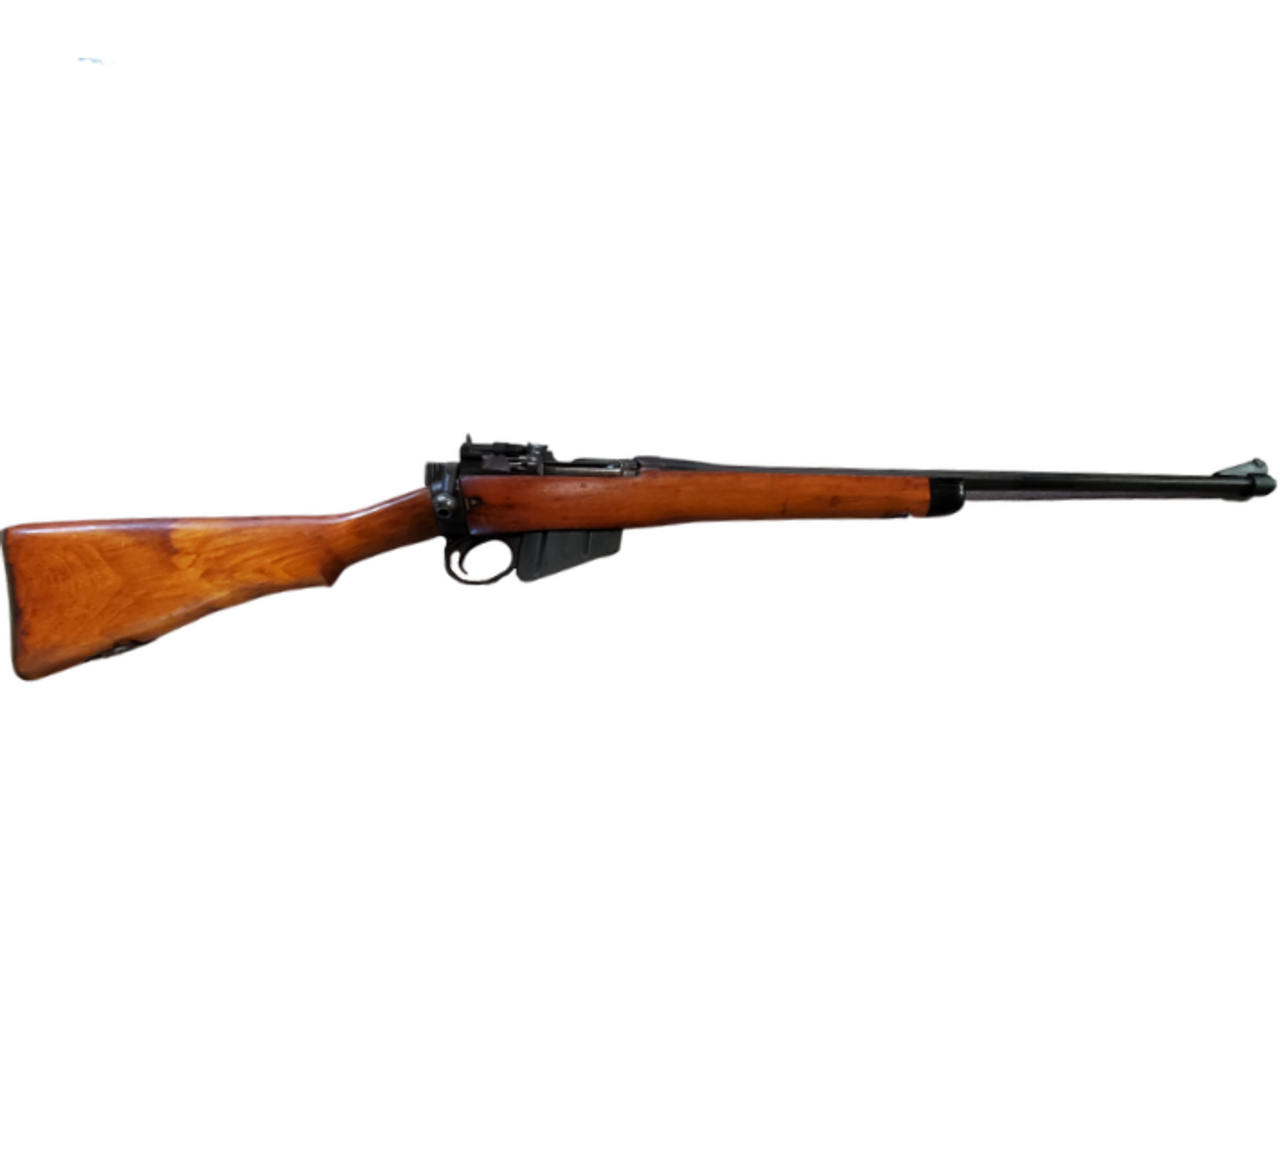 Lee Enfield No. 4 Mk I (Sporterized) - Canada First Ammo Corp.